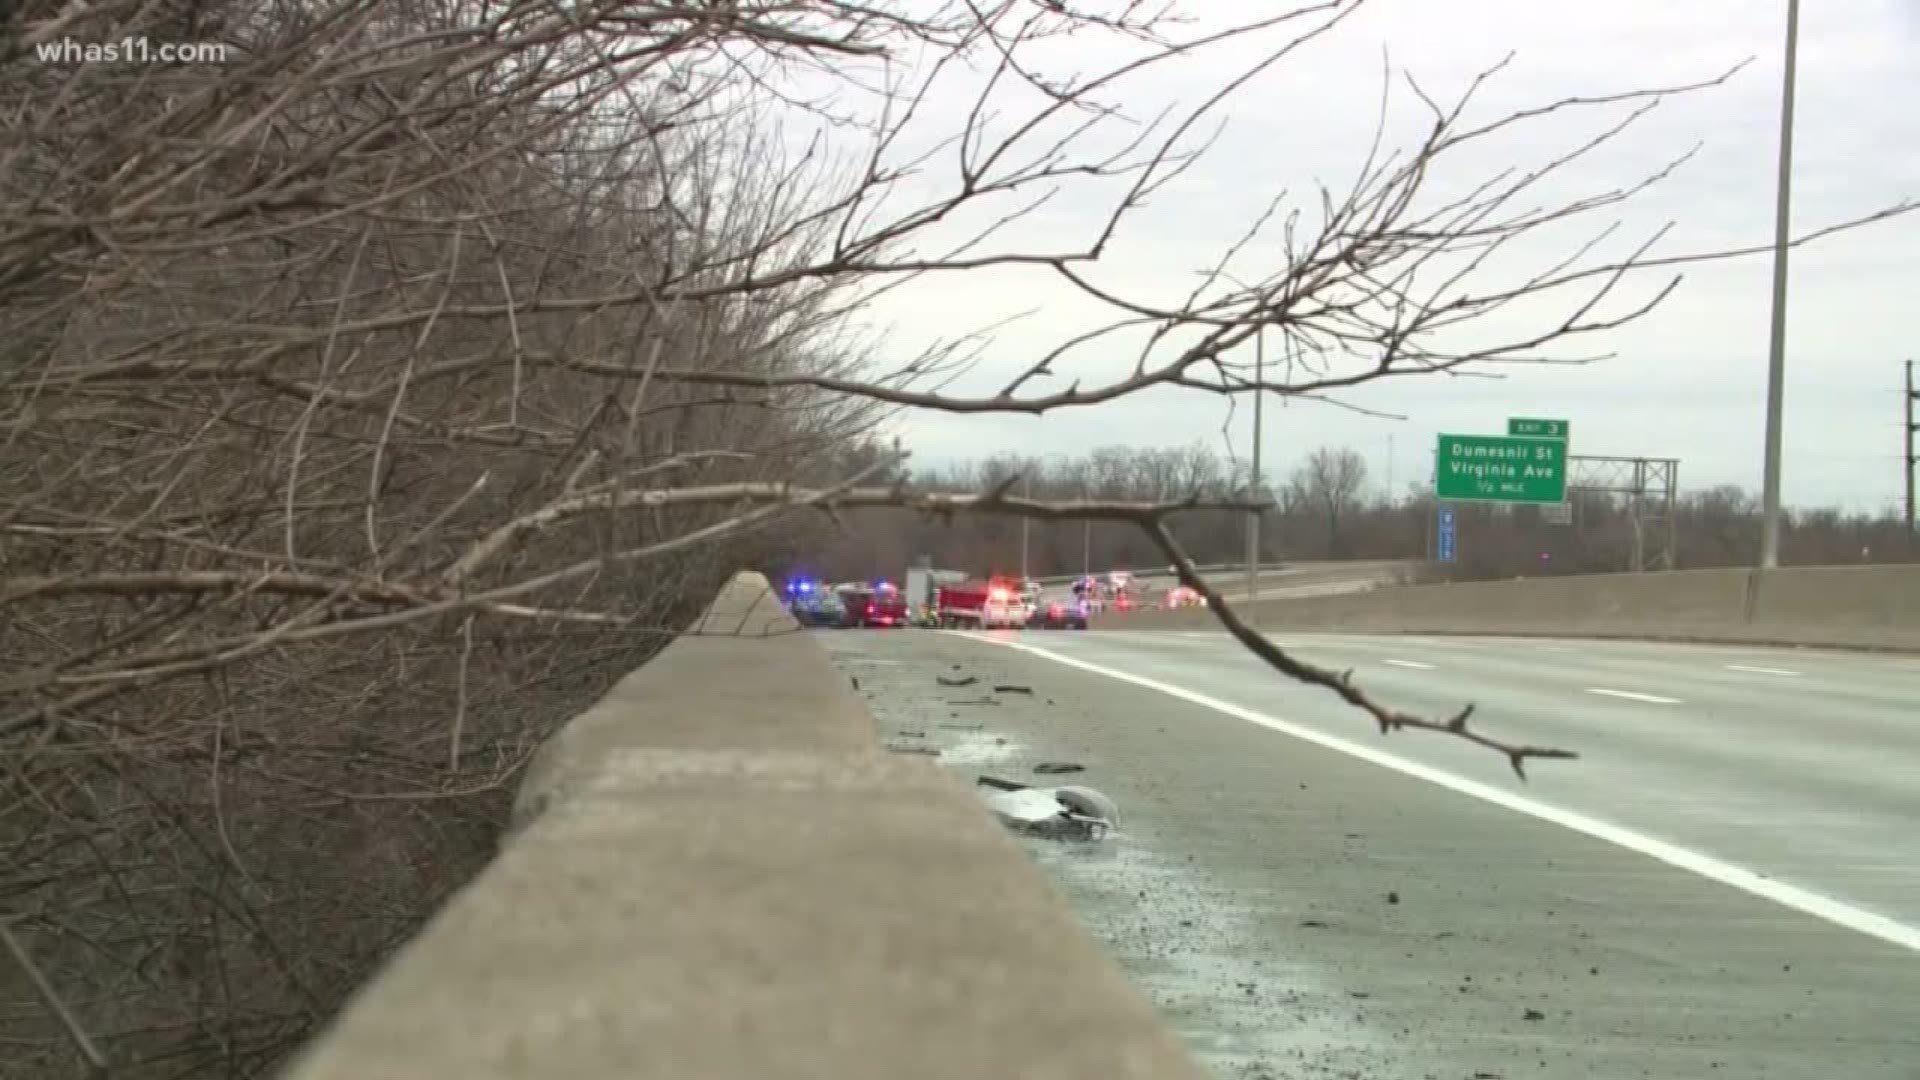 A dump truck slammed into an ambulance on I-264E and the resulting collisions sent seven people to the hospital.